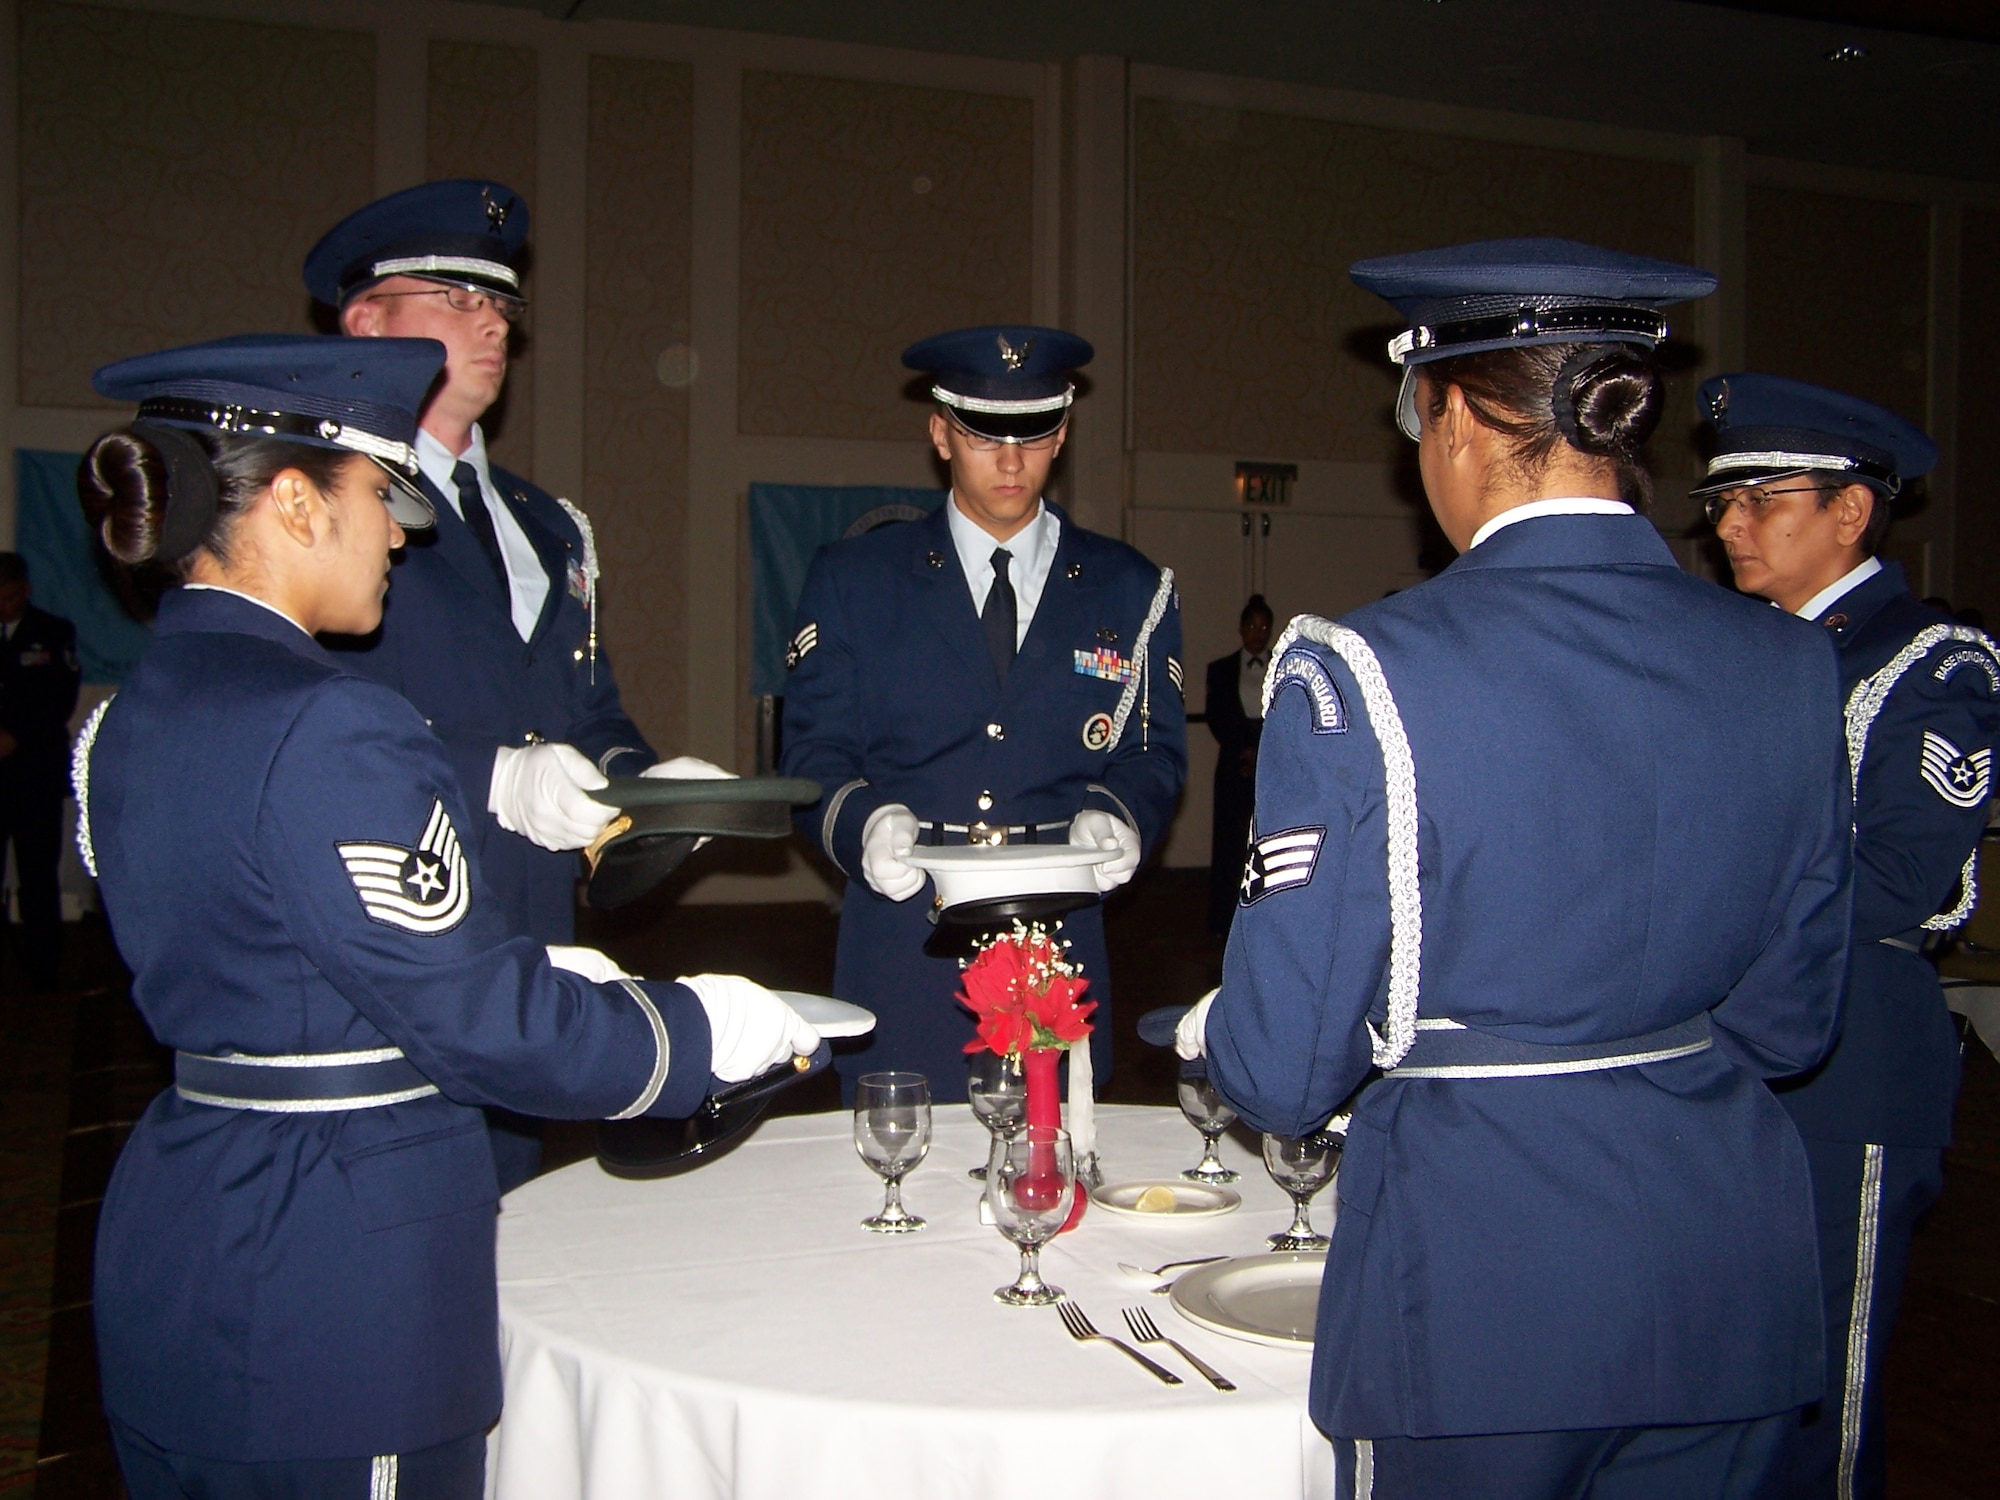 Members of the Homestead Air Reserve Base honor guard, conduct the POW/MIA ceremony at the "Heritage to Horizons" Air Force Ball Nov. 2, 2007.  The ceremony centers around a small table, which occupies a place of dignity and honor near the head table. It is set for one, symbolizing the fact that members of all our armed forces are missing from our ranks. The night’s event is part of a year long world-wide celebration commemorating the 60th Anniversary of the U.S. Air Force and local military members recently deployed. The gala was co-hosted by the 482nd Fighter Wing, Homestead ARB, Fla., and the Greater Homestead/Florida City Chamber of Commerce Military Affairs Committee. (U.S. Air Force photo/Tim Norton) 

